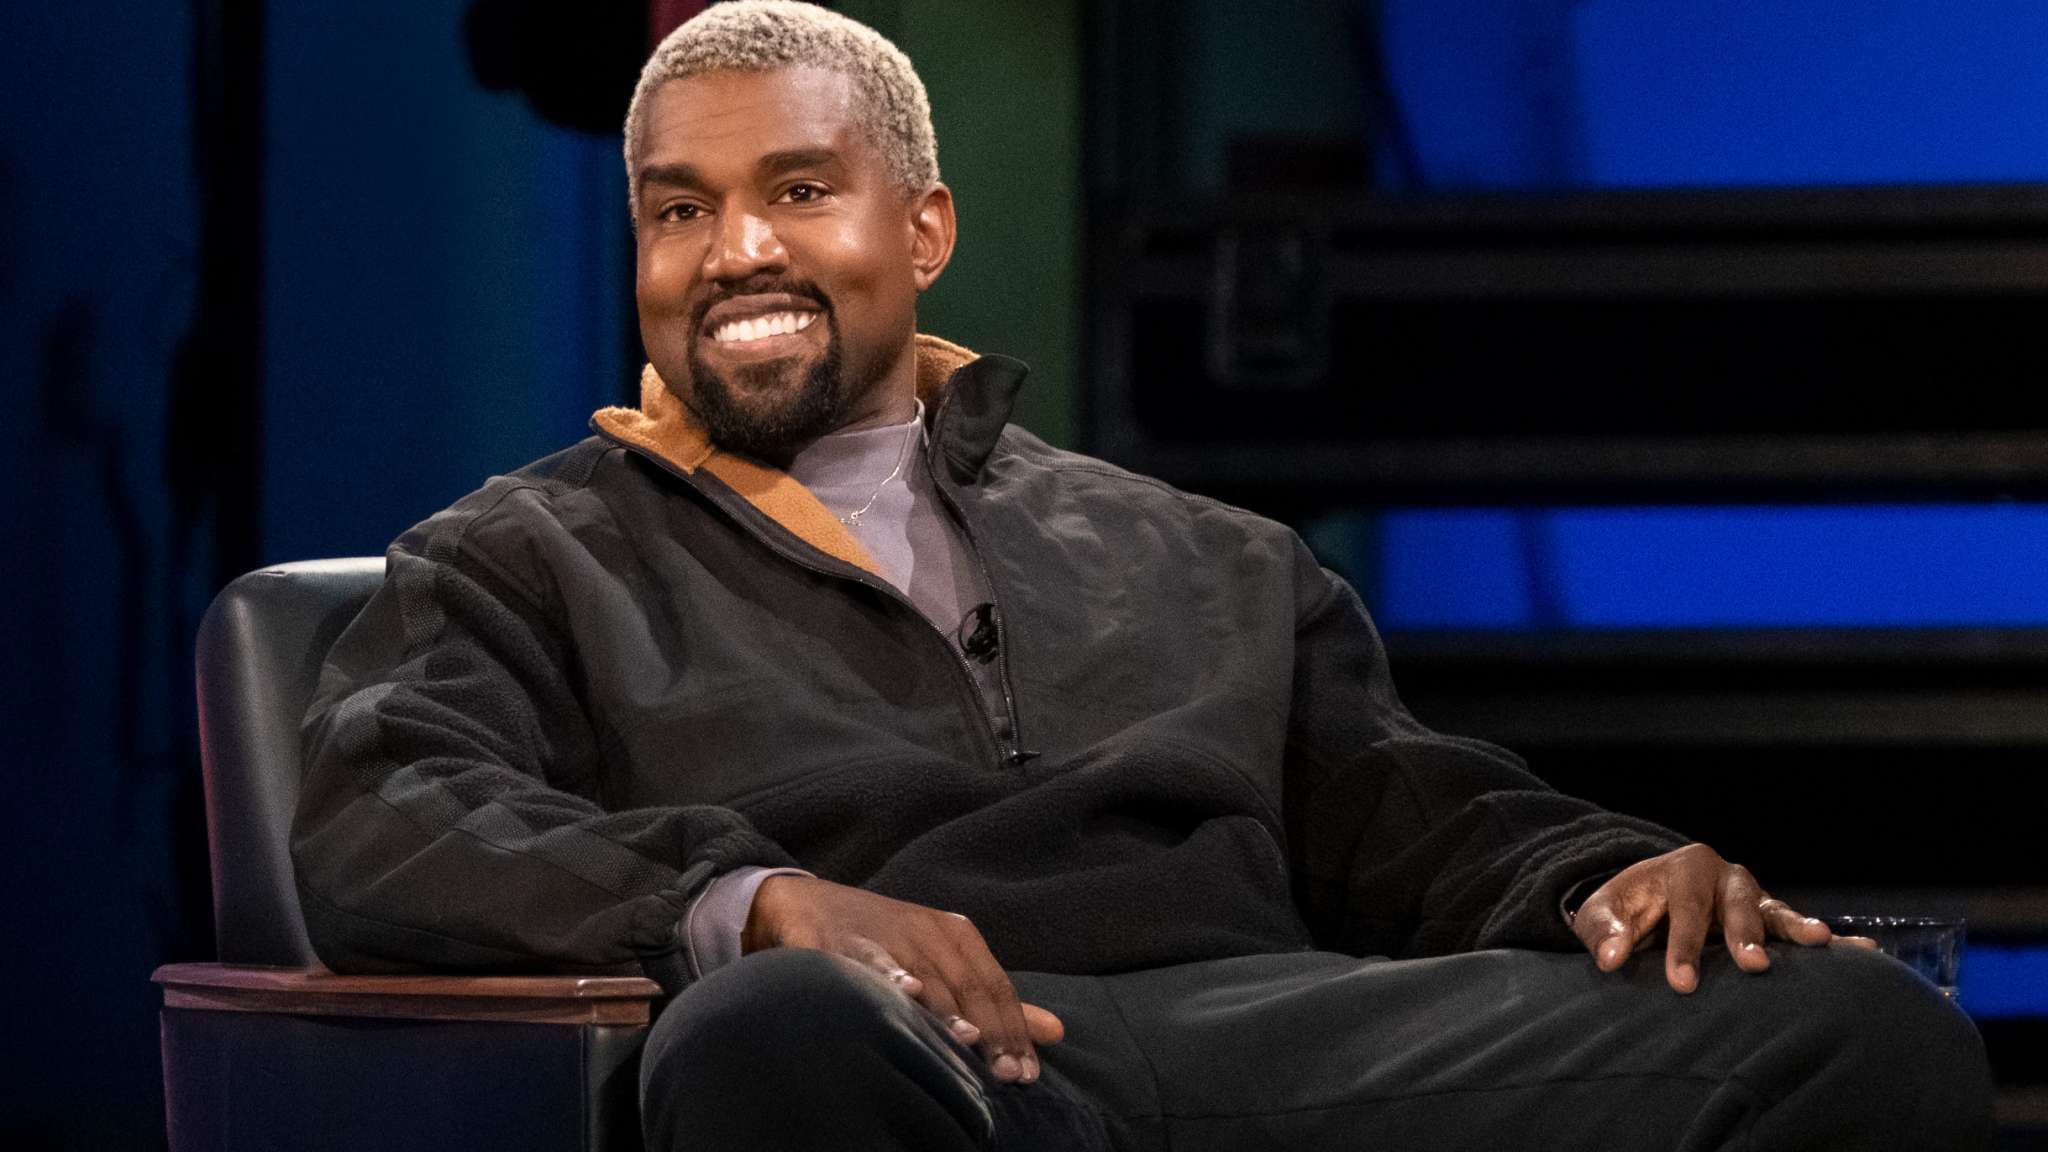 kanye-west-has-fans-laughing-after-mentioning-pete-davidsons-name-in-his-new-music